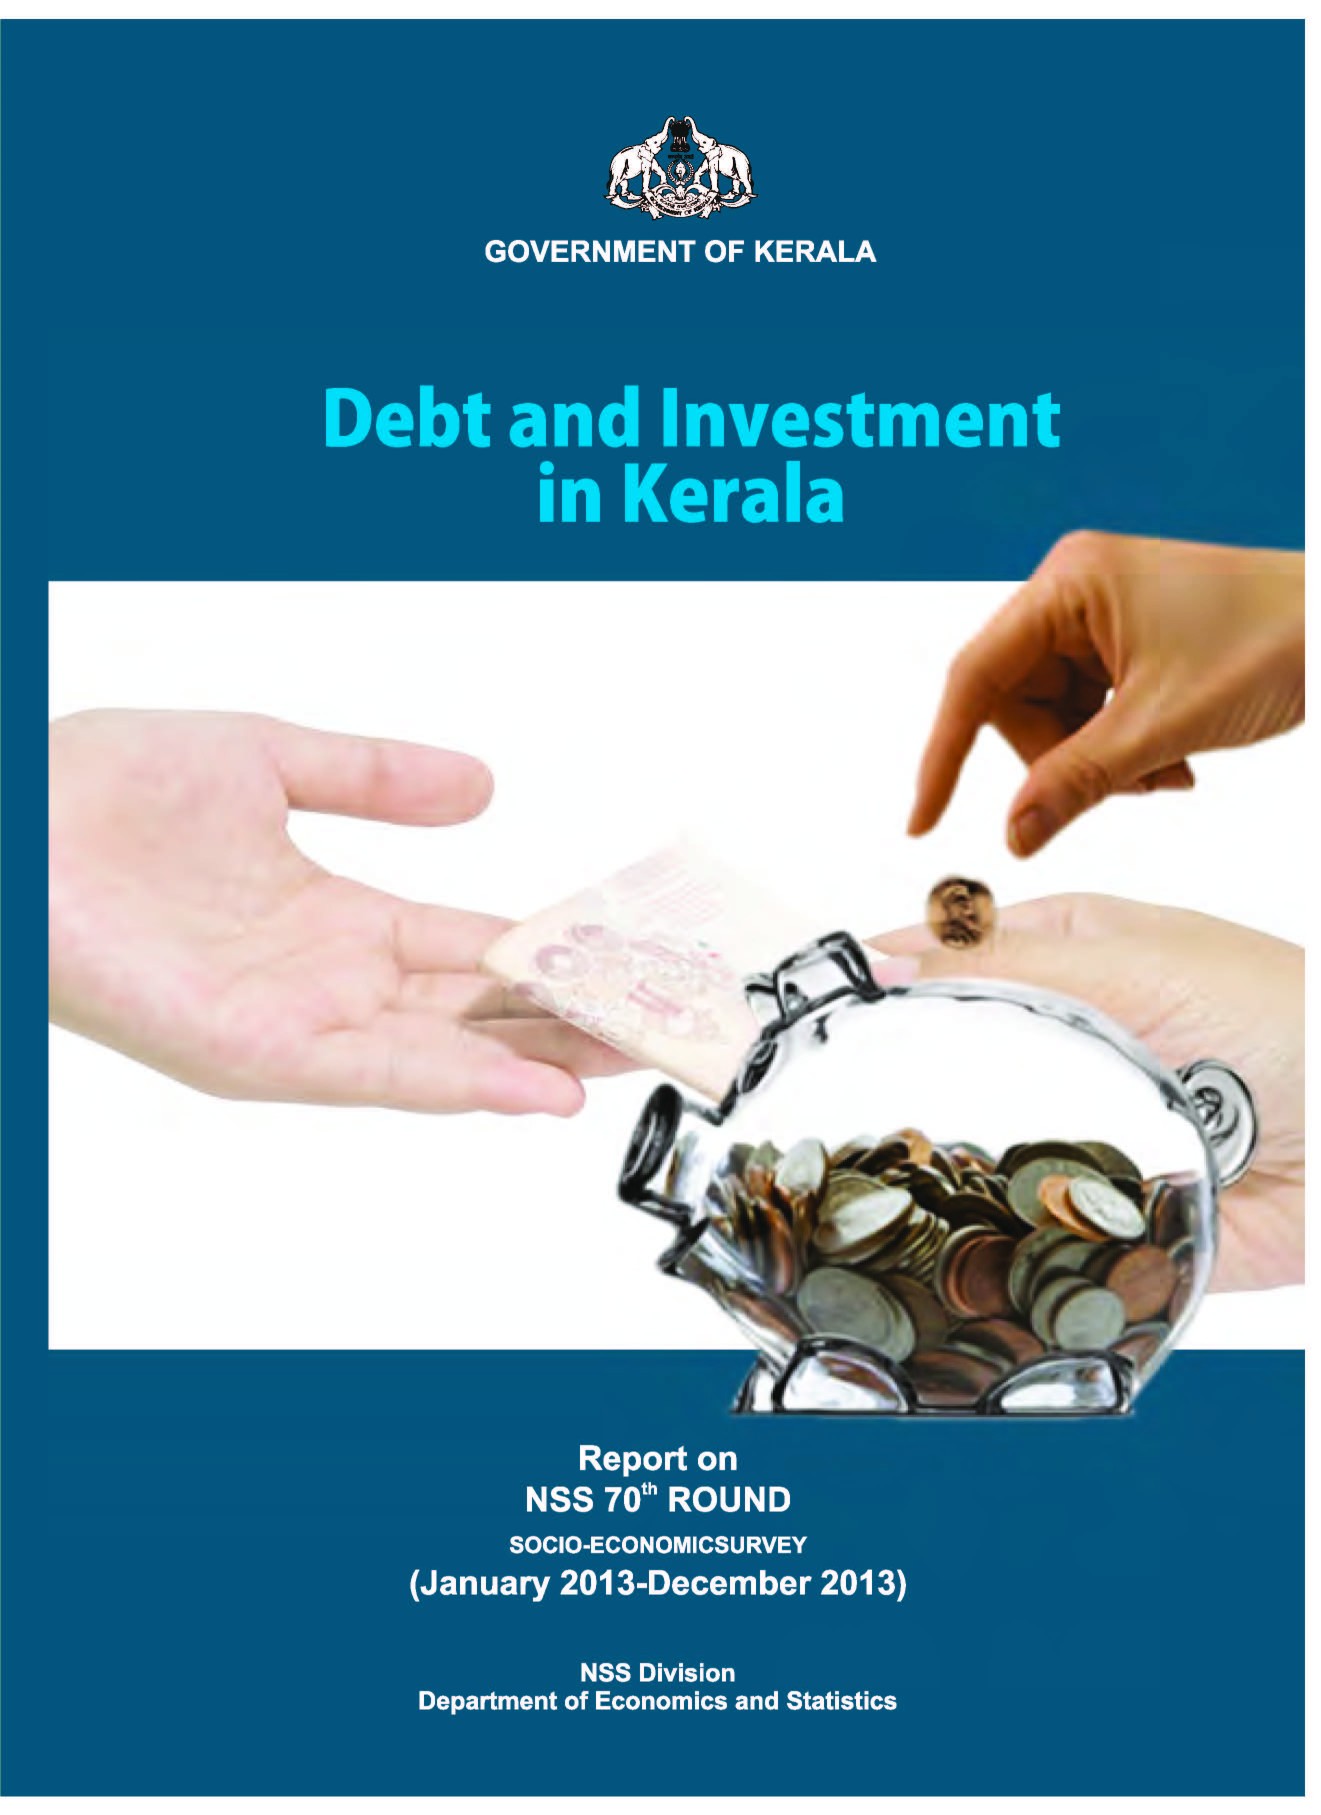 NSS 70th round - Debt and Investment in Kerala